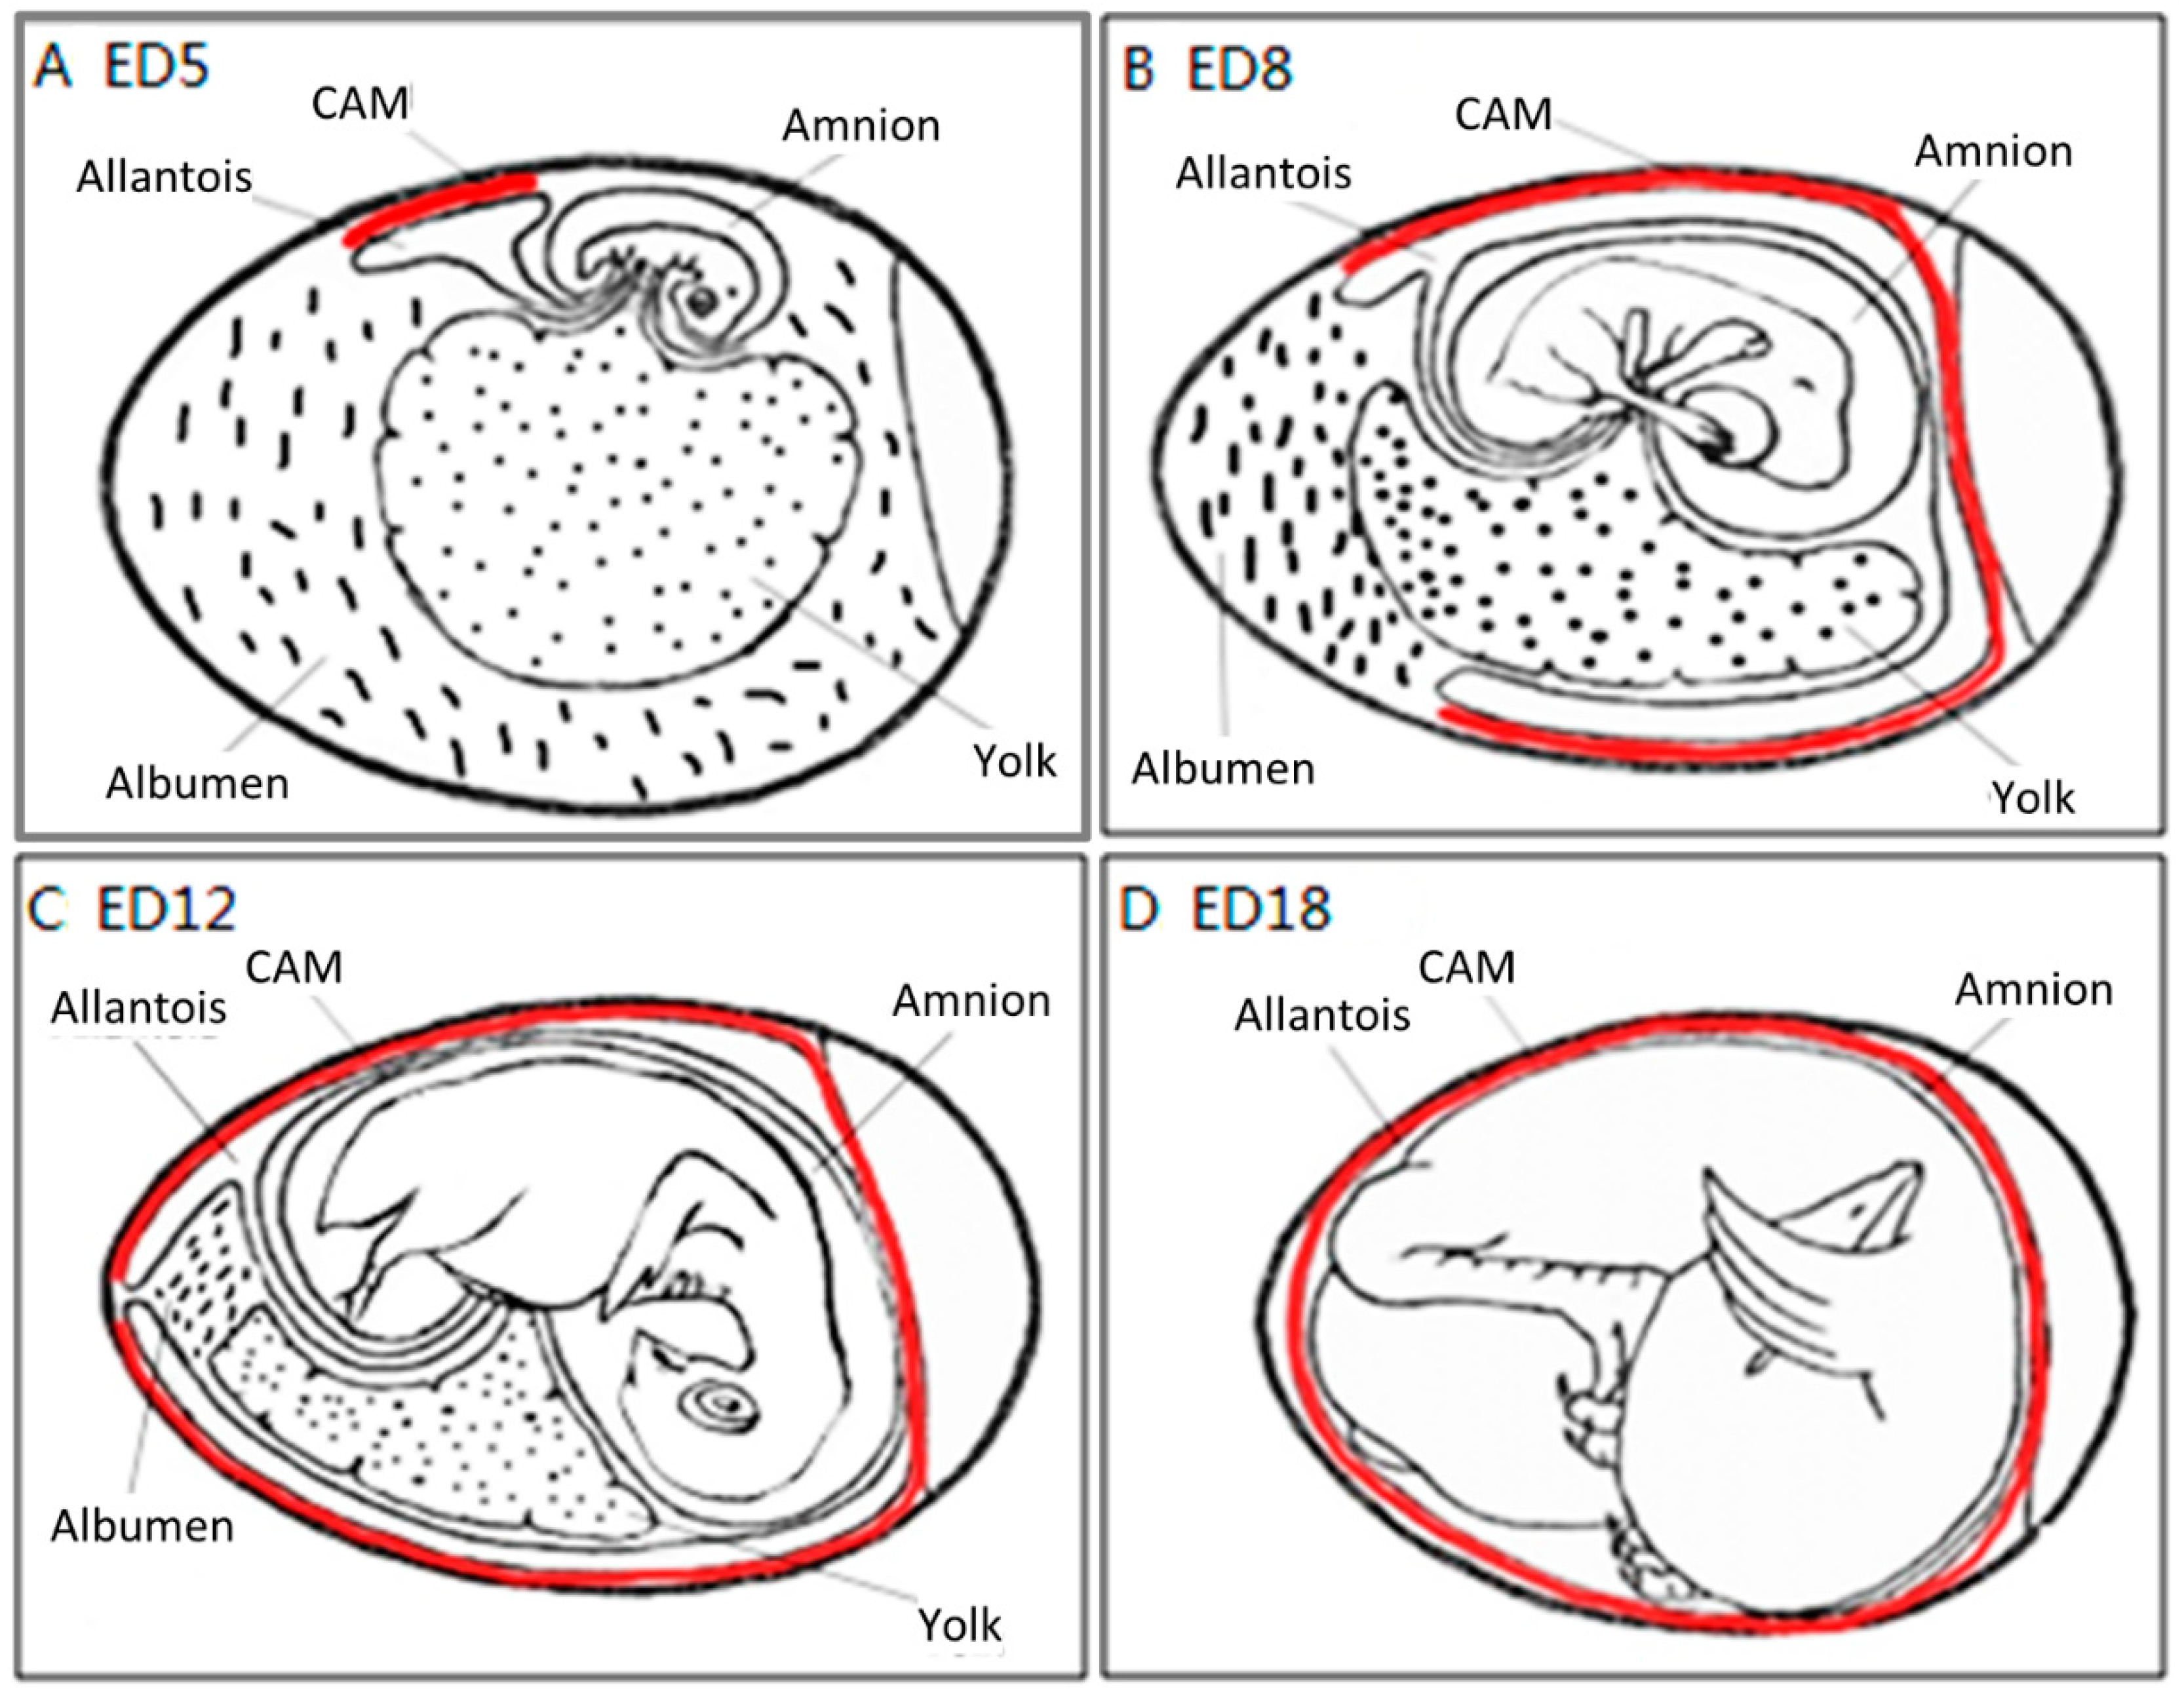 Cells | Free Full-Text | Utilisation of Chick Embryo Chorioallantoic  Membrane as a Model Platform for Imaging-Navigated Biomedical Research |  HTML